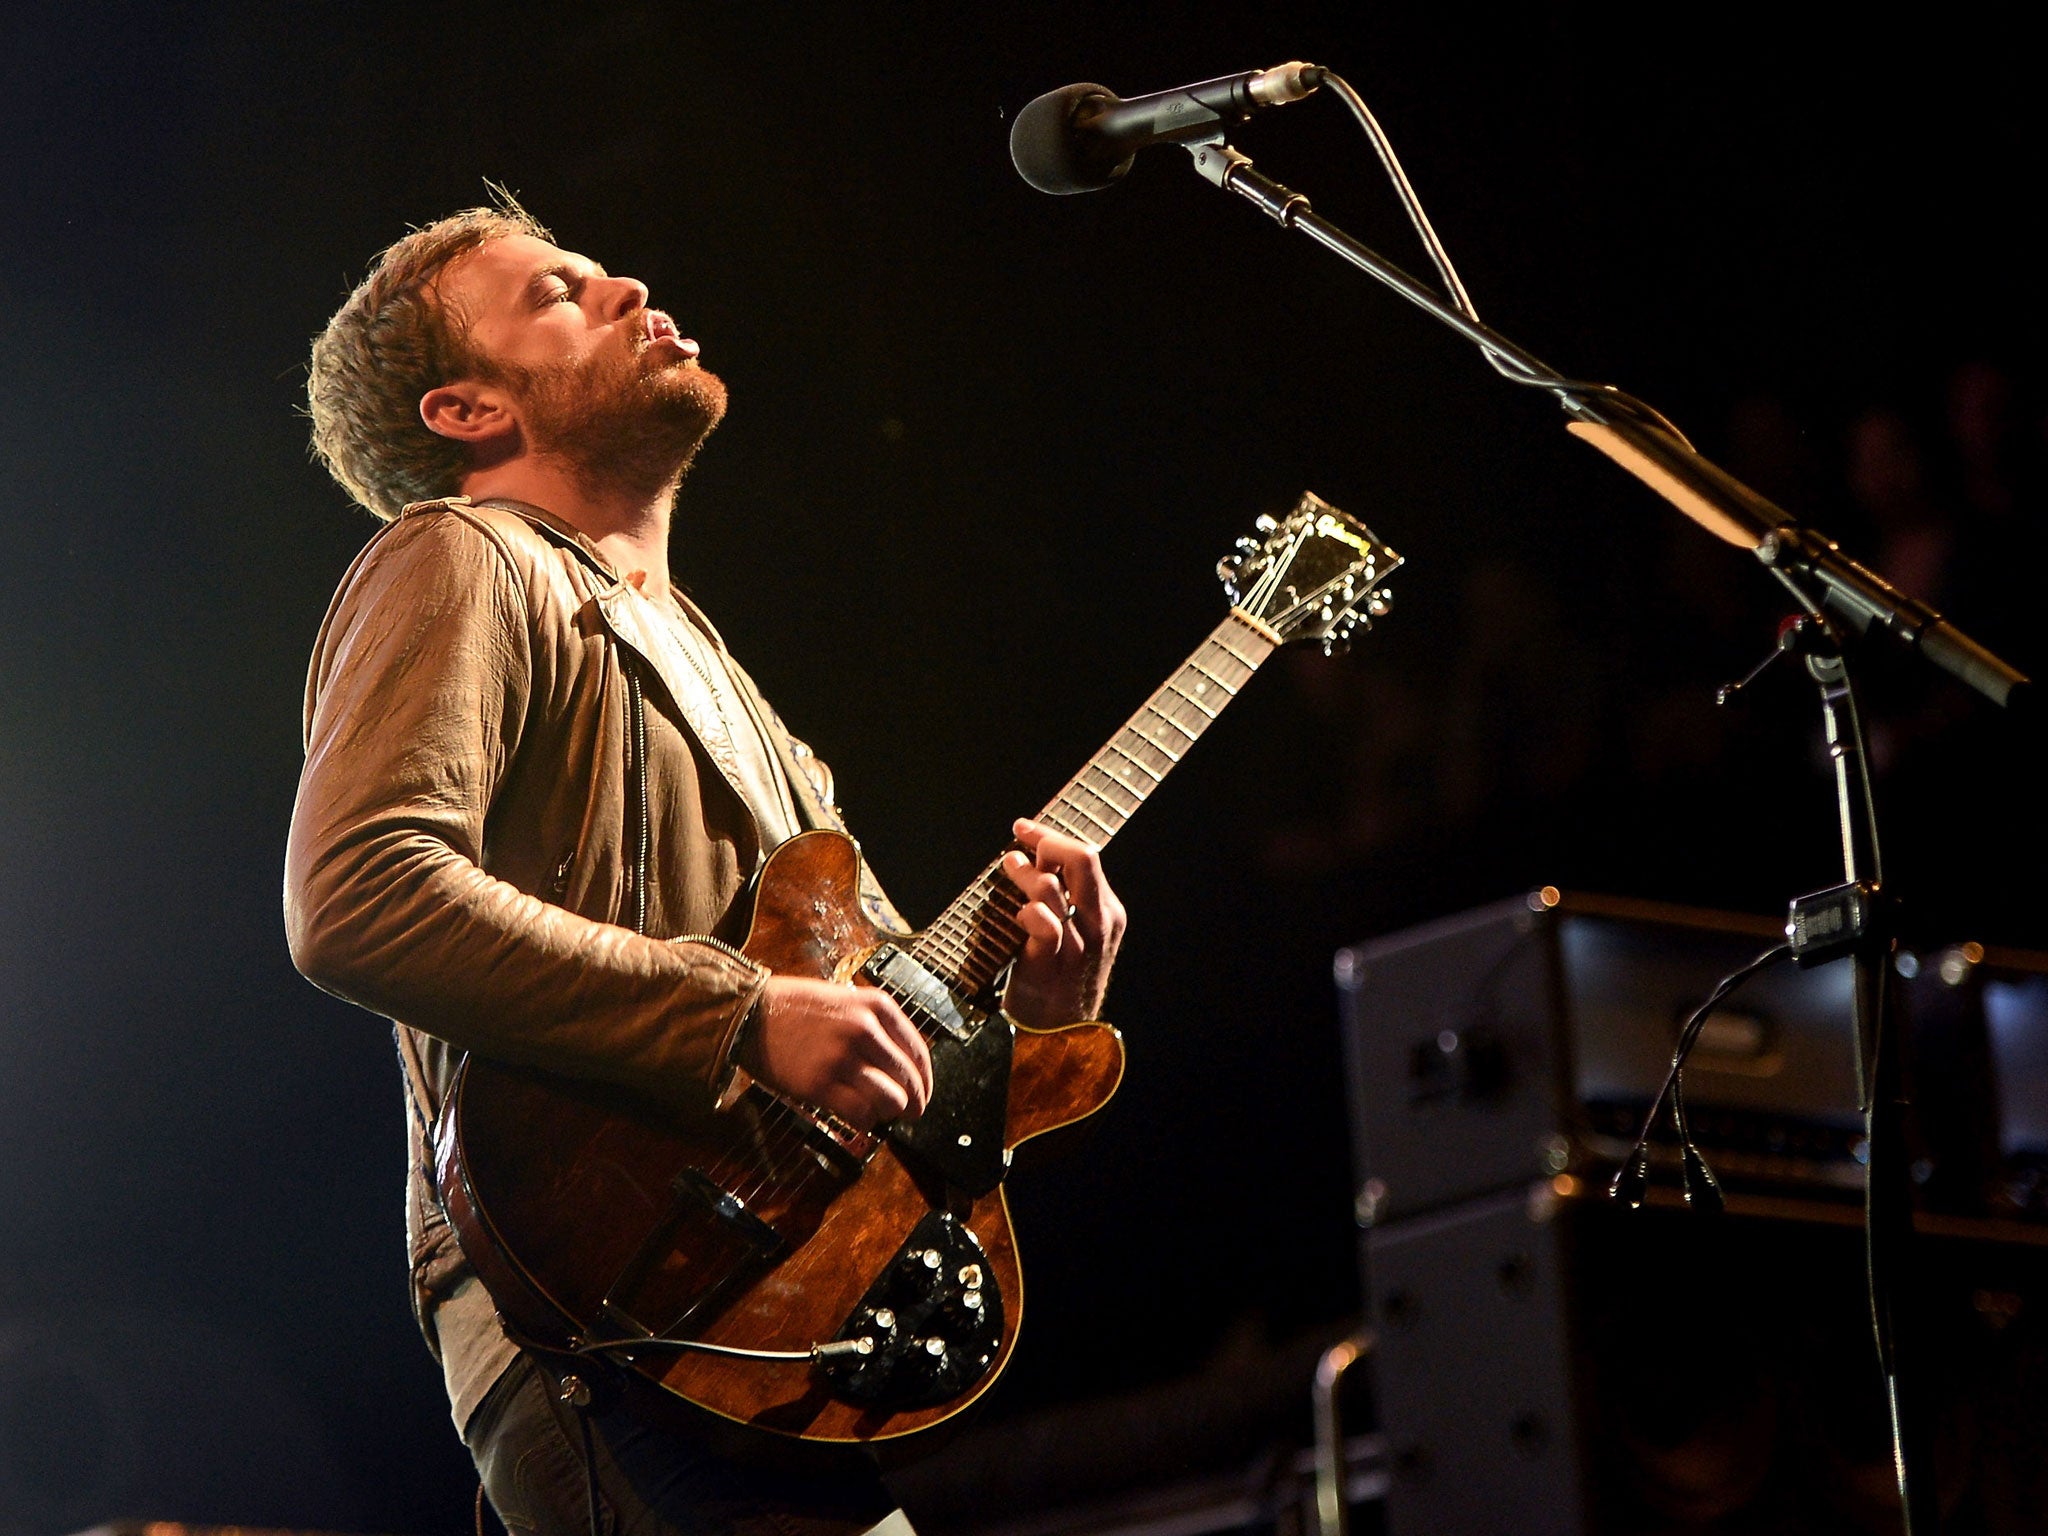 Caleb Followill of Kings of Leon; the band were forced to cancel last night's Firefly Festival performance